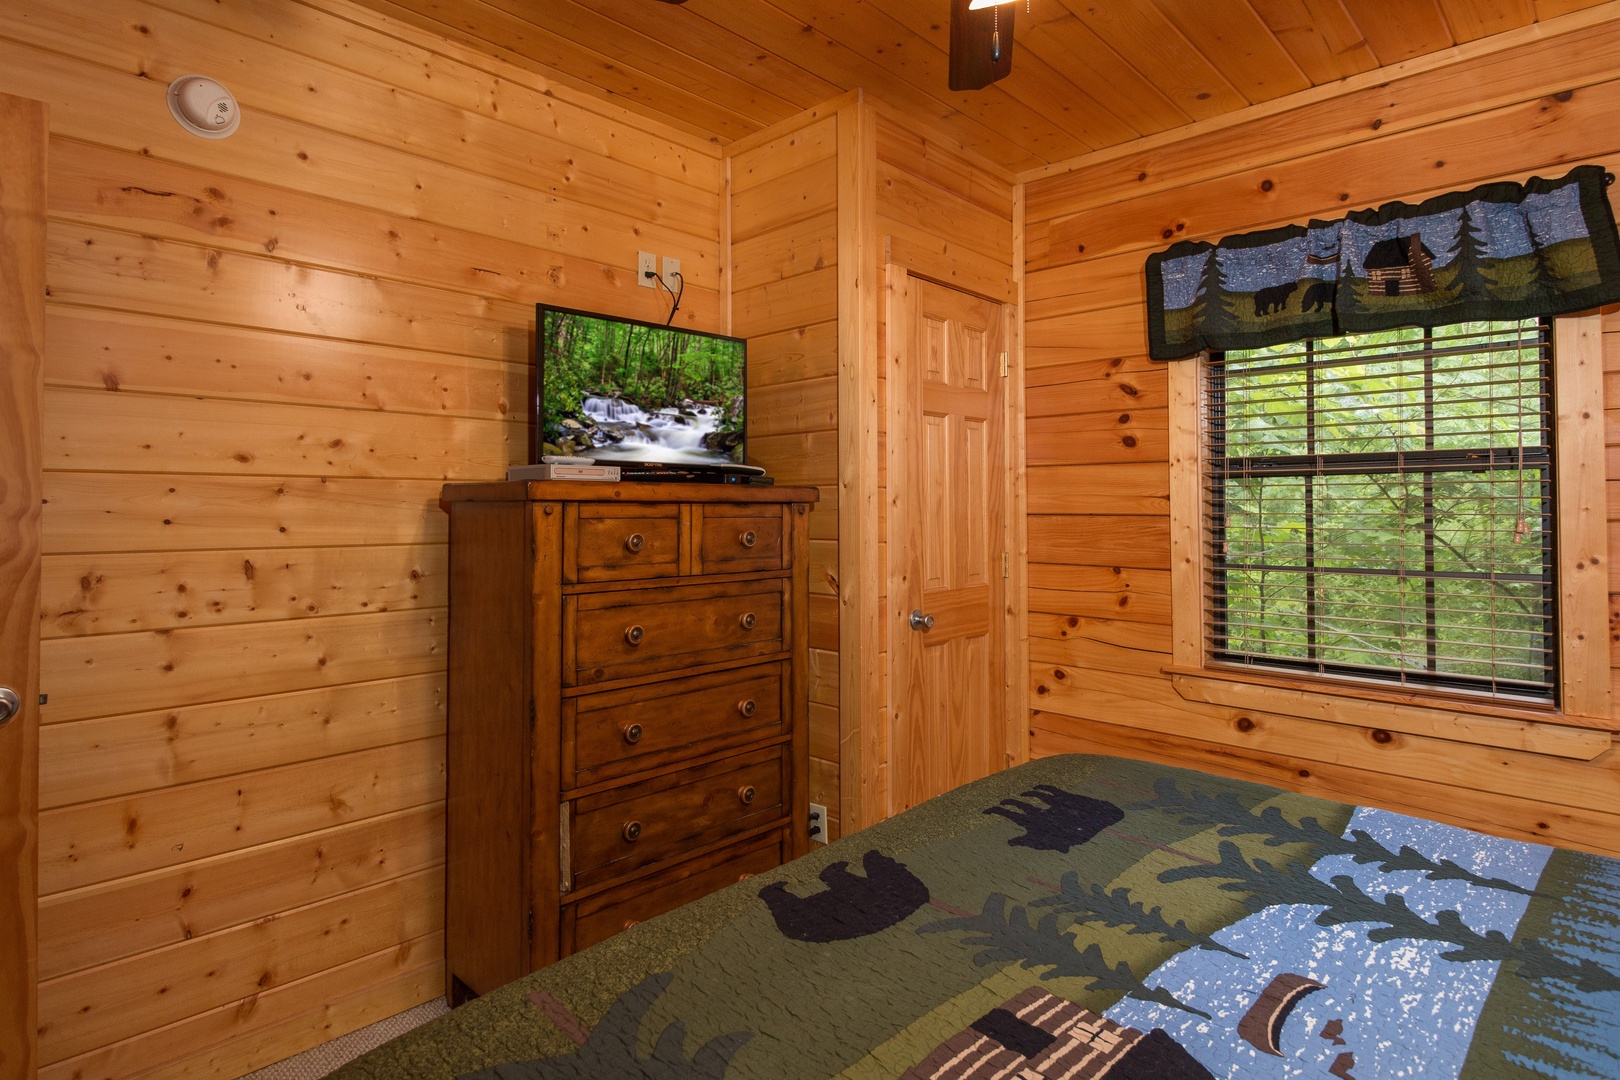 Bedroom flat screen on the dresser at Family Ties Lodge, a 4 bedroom cabin rental located in pigeon forge